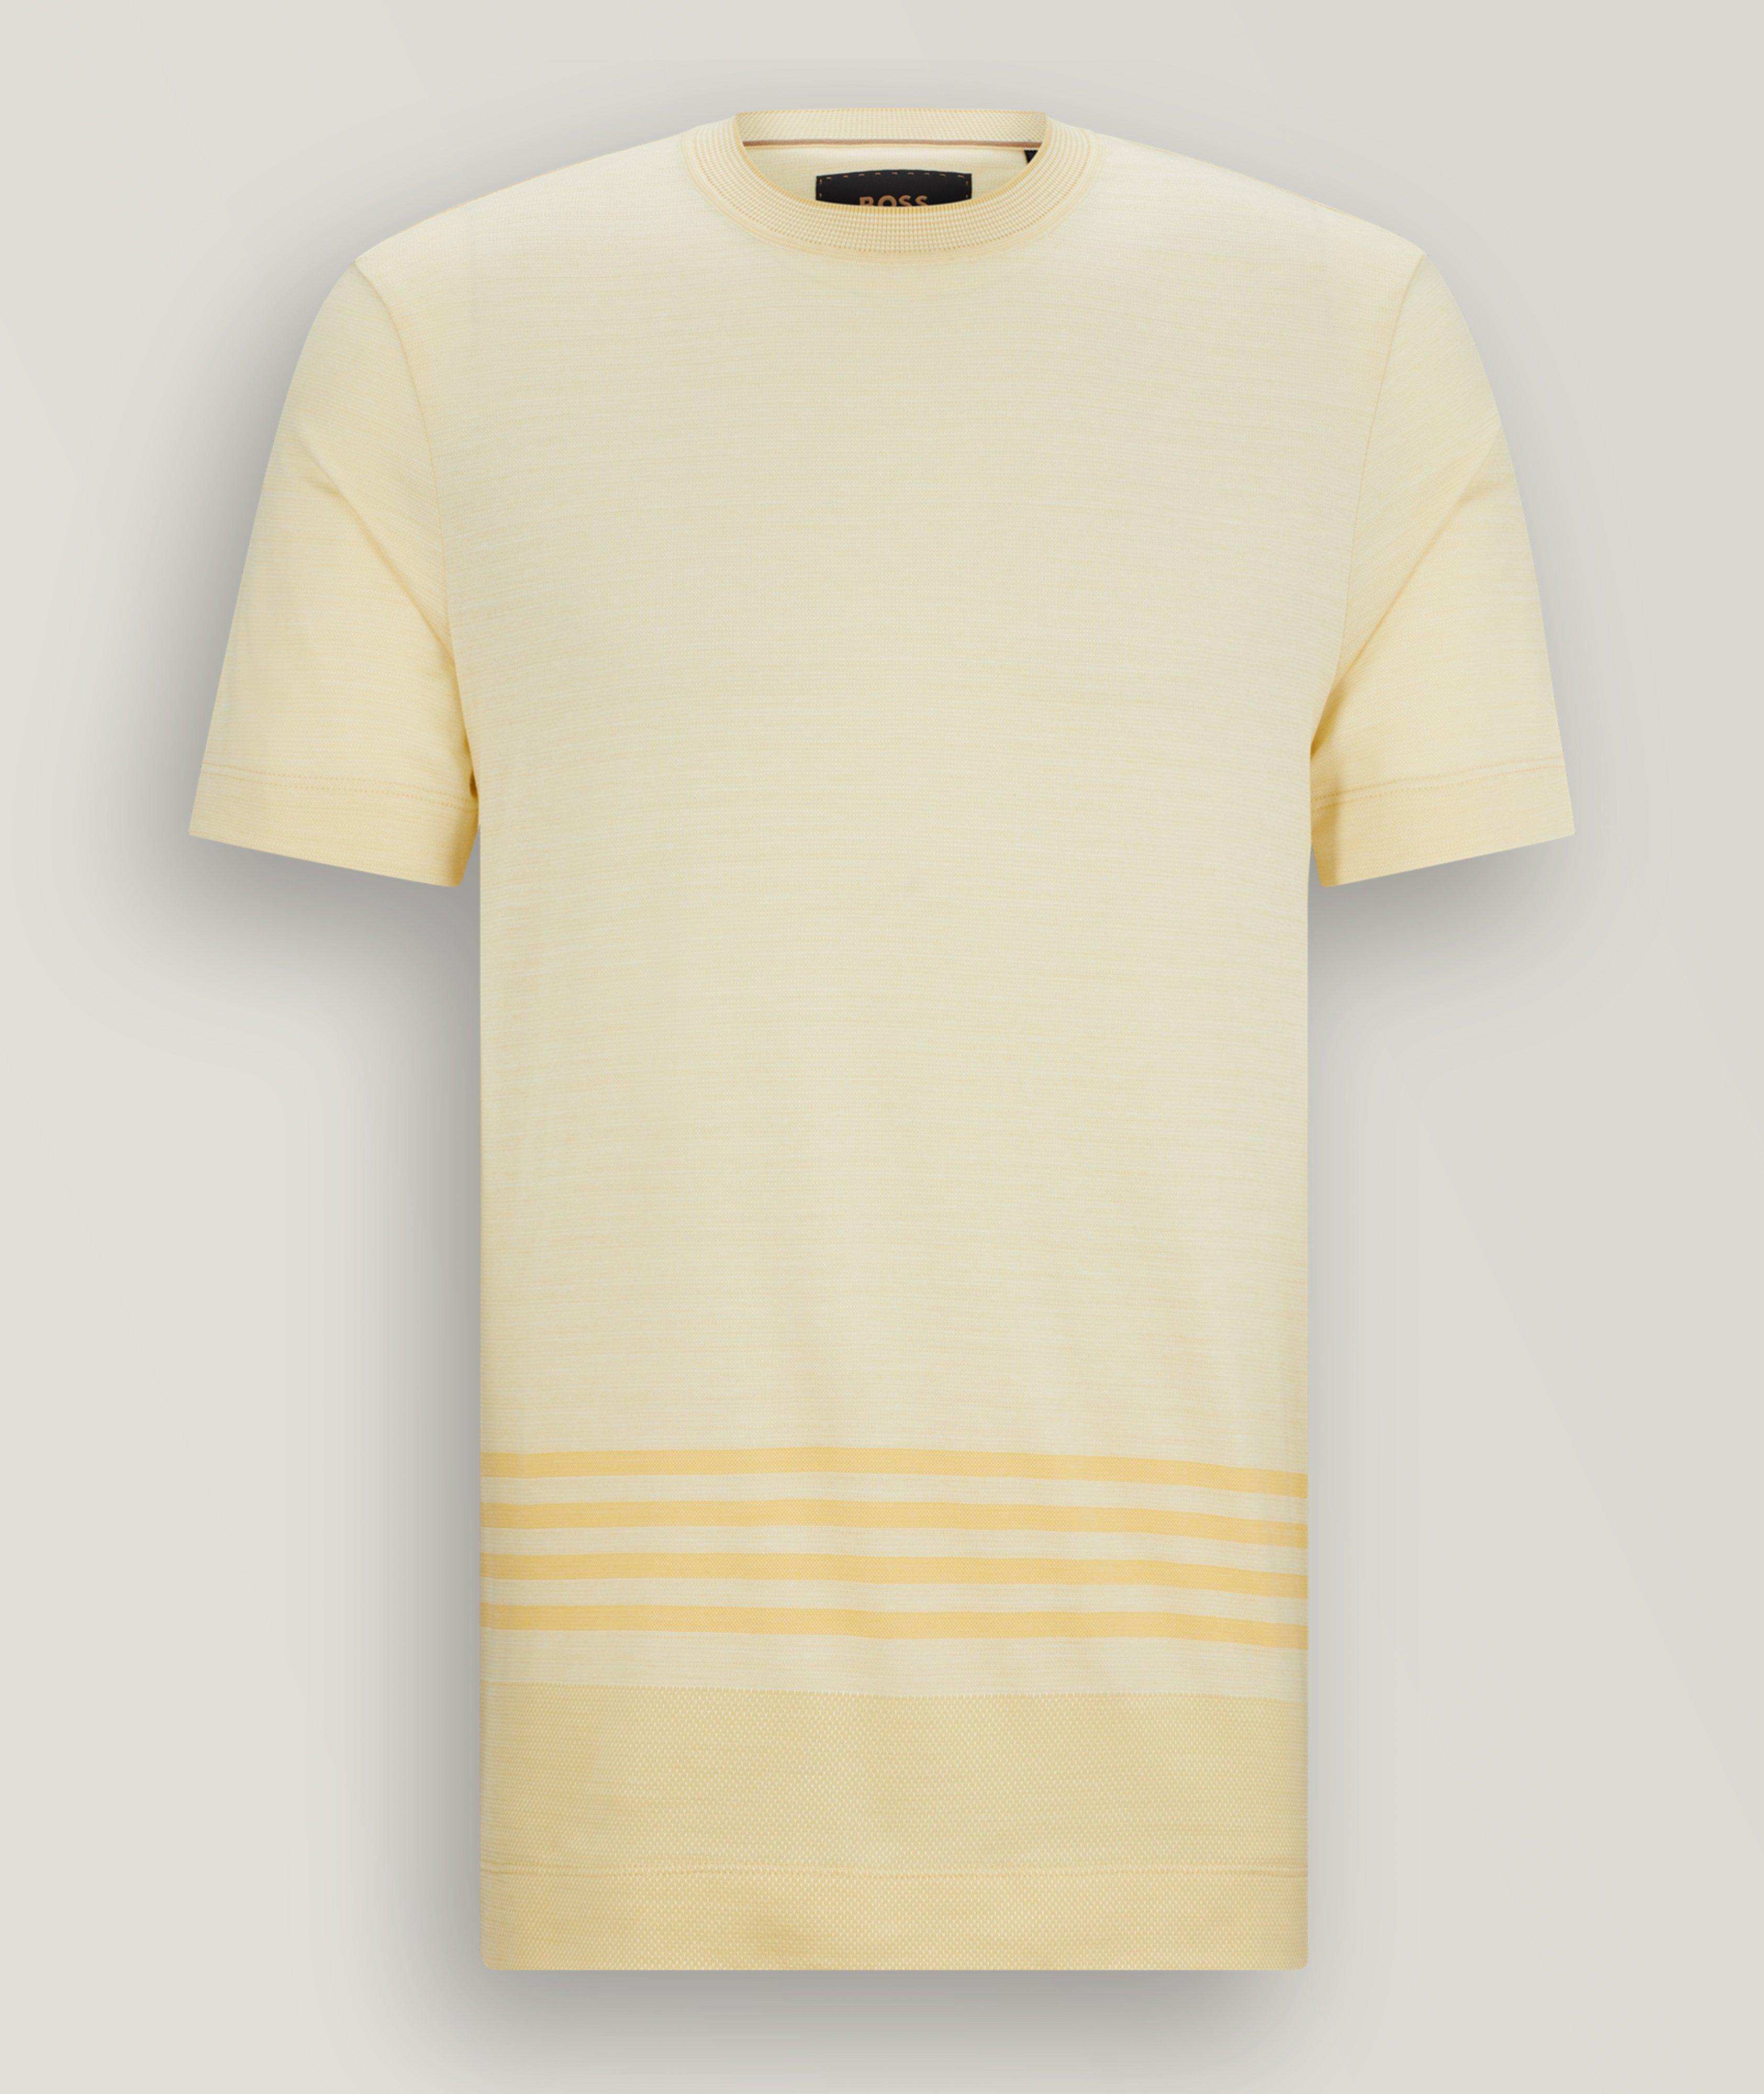 Two-Toned Striped Cotton-Silk T-Shirt image 0